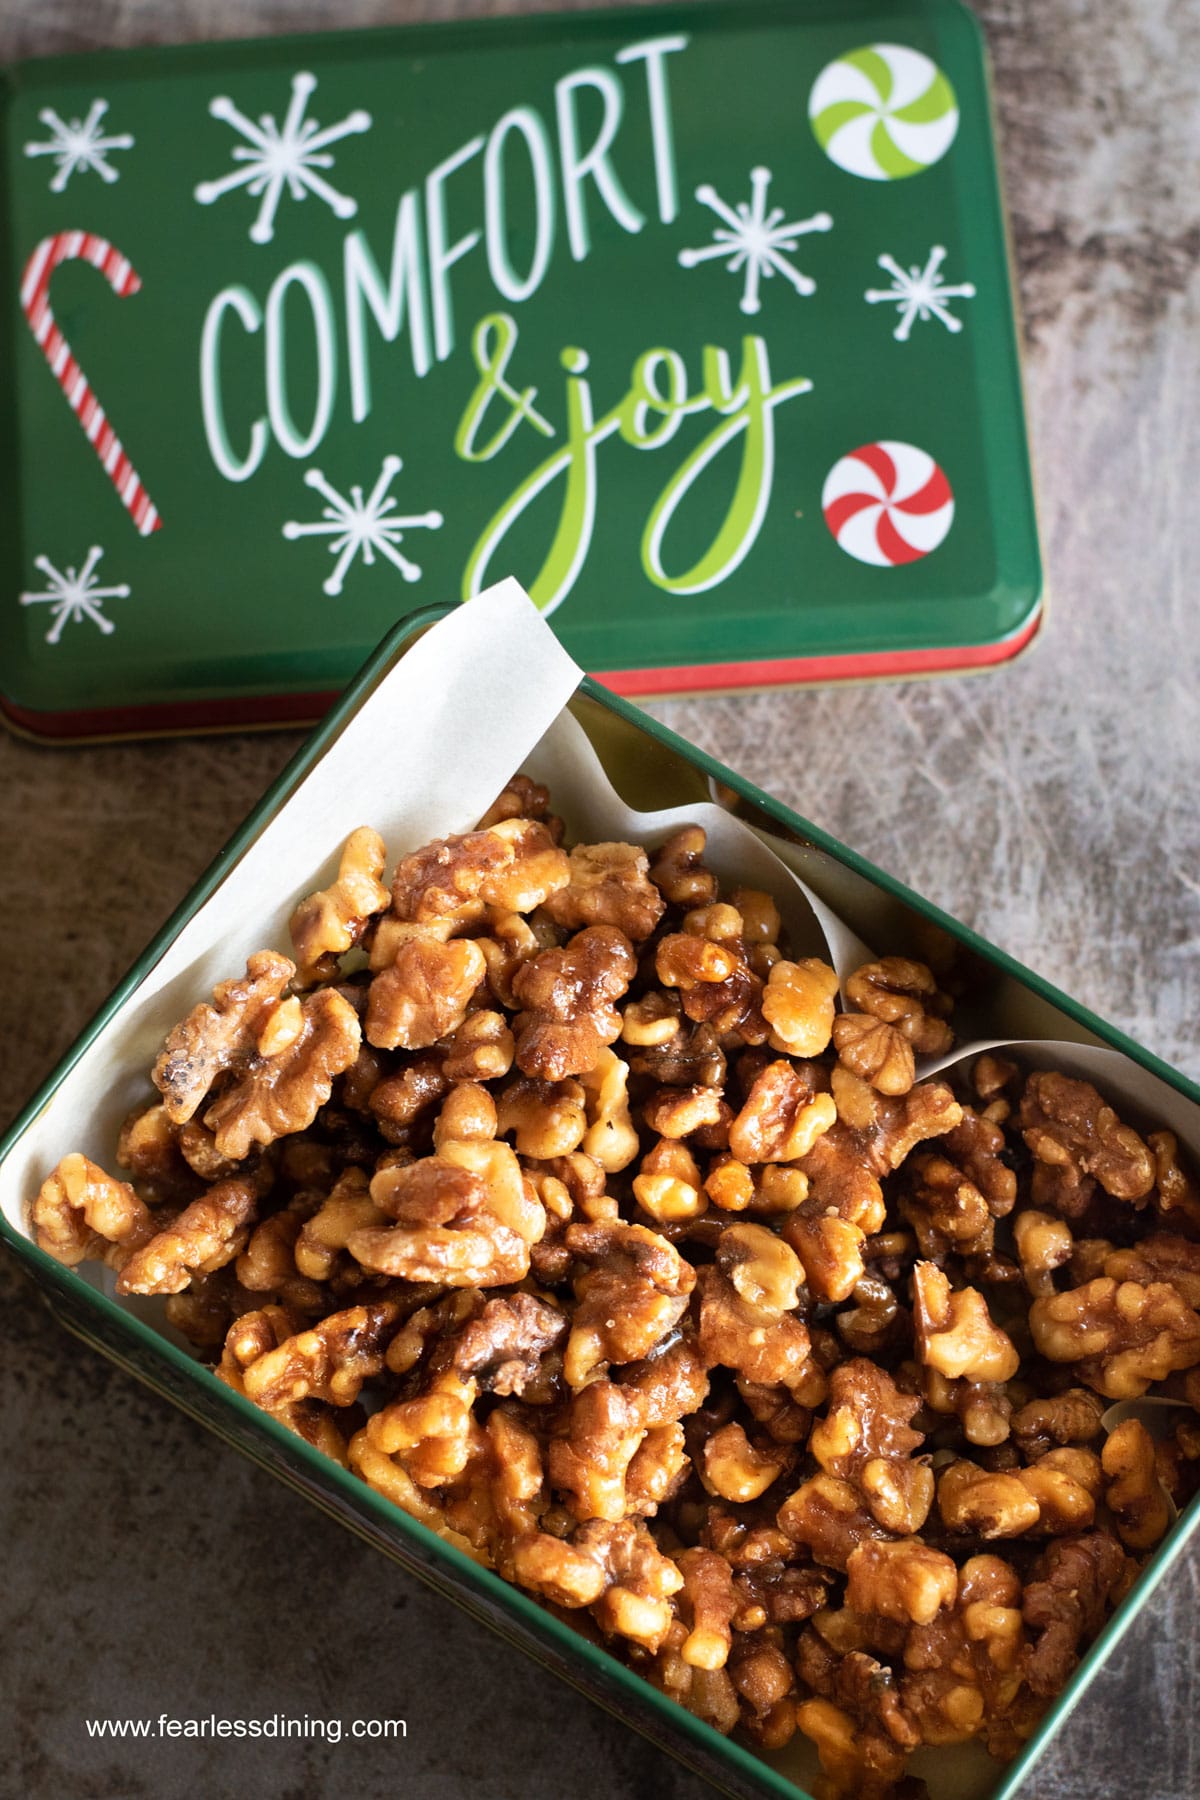 A Christmas tin filled with cinnamon spiced walnuts.